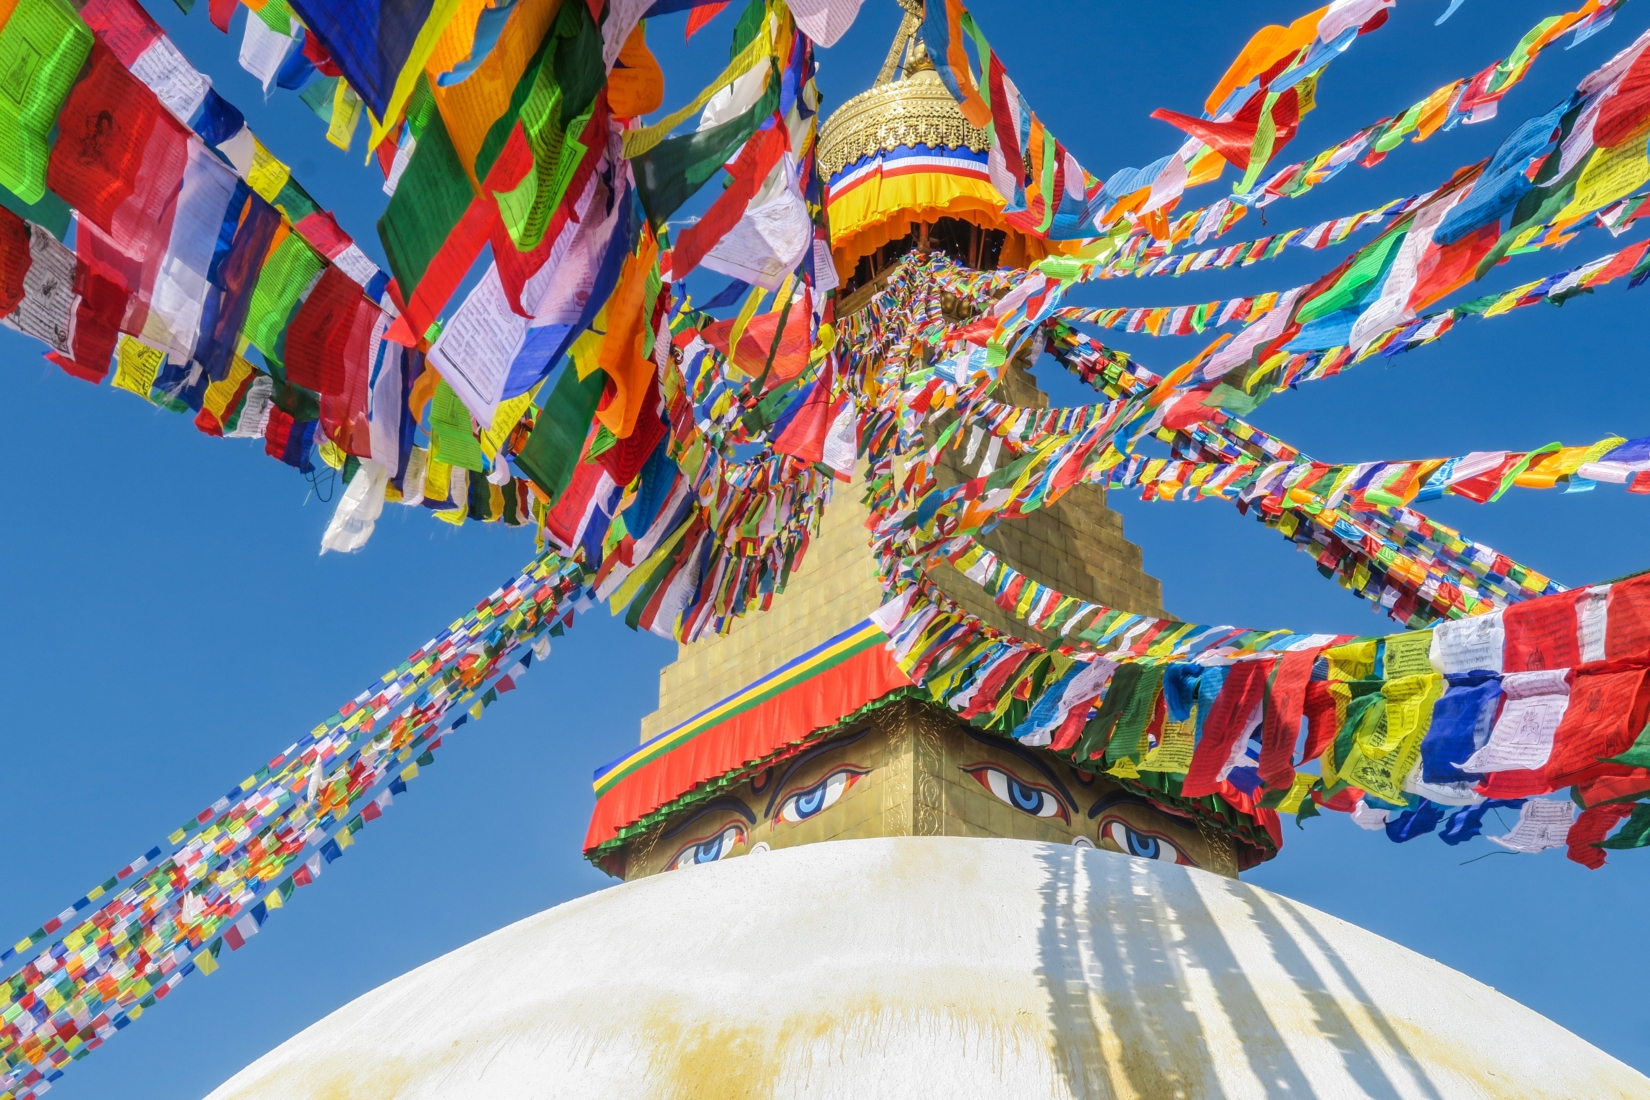 An image of colorful prayer flags adorning a sacred shrine in Durbar Square Kathmandu